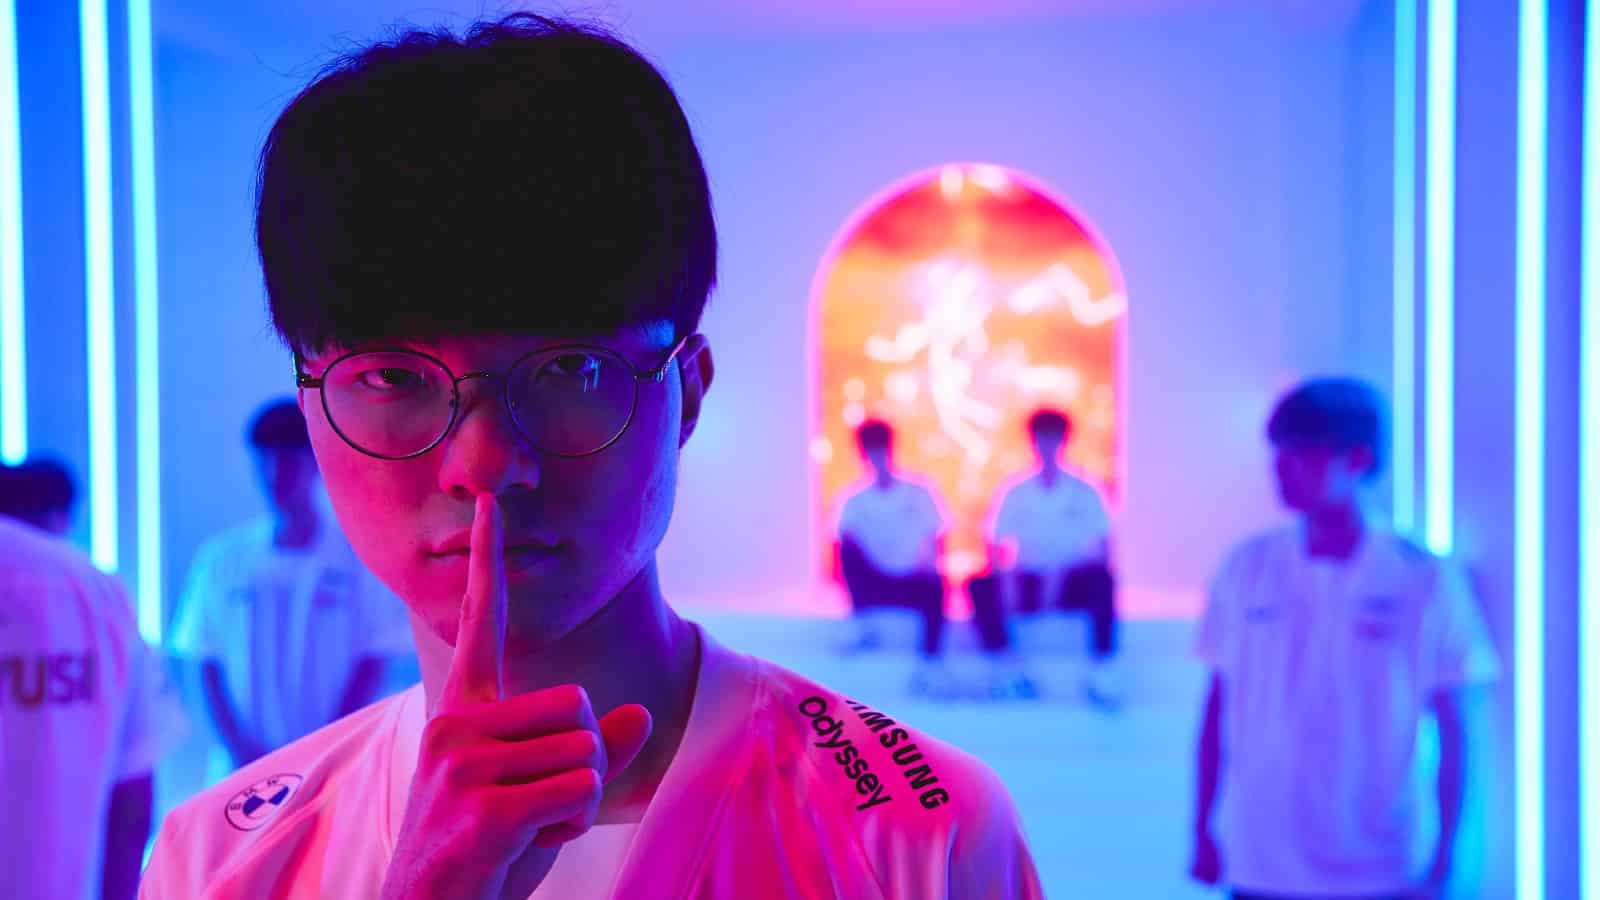 Faker wants a challenge in Worlds 2021 playoffs: “I'm here to win